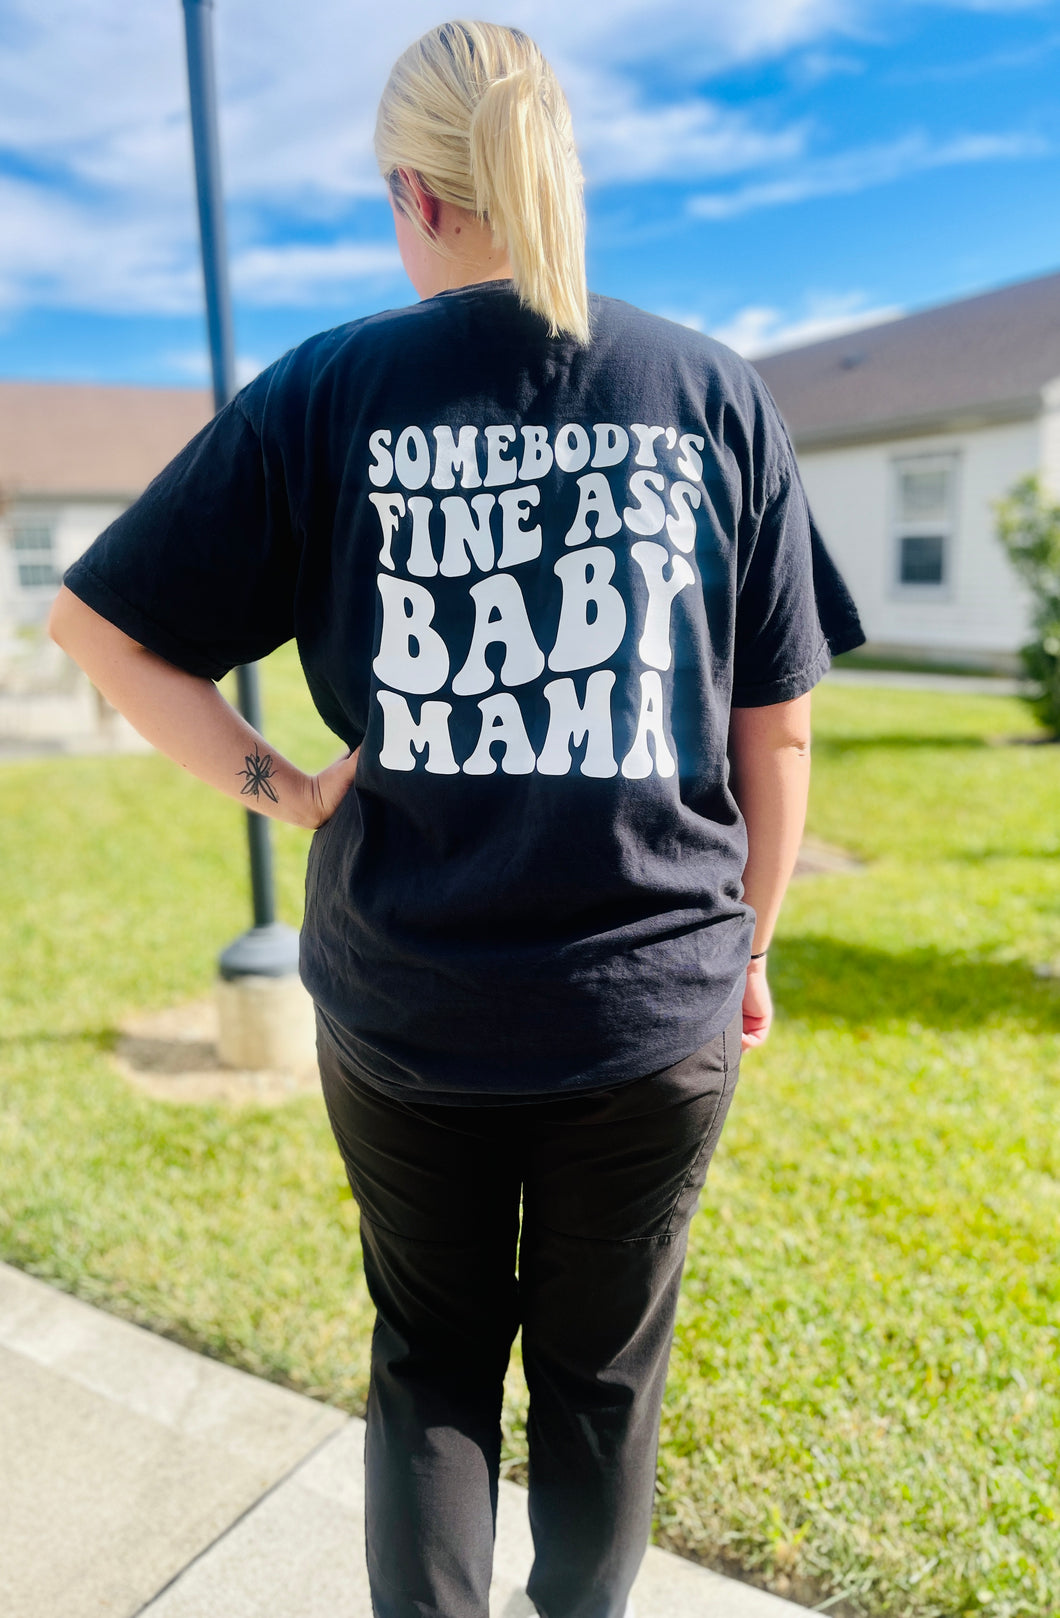 Somebody’s  fine a$$ baby mama tee